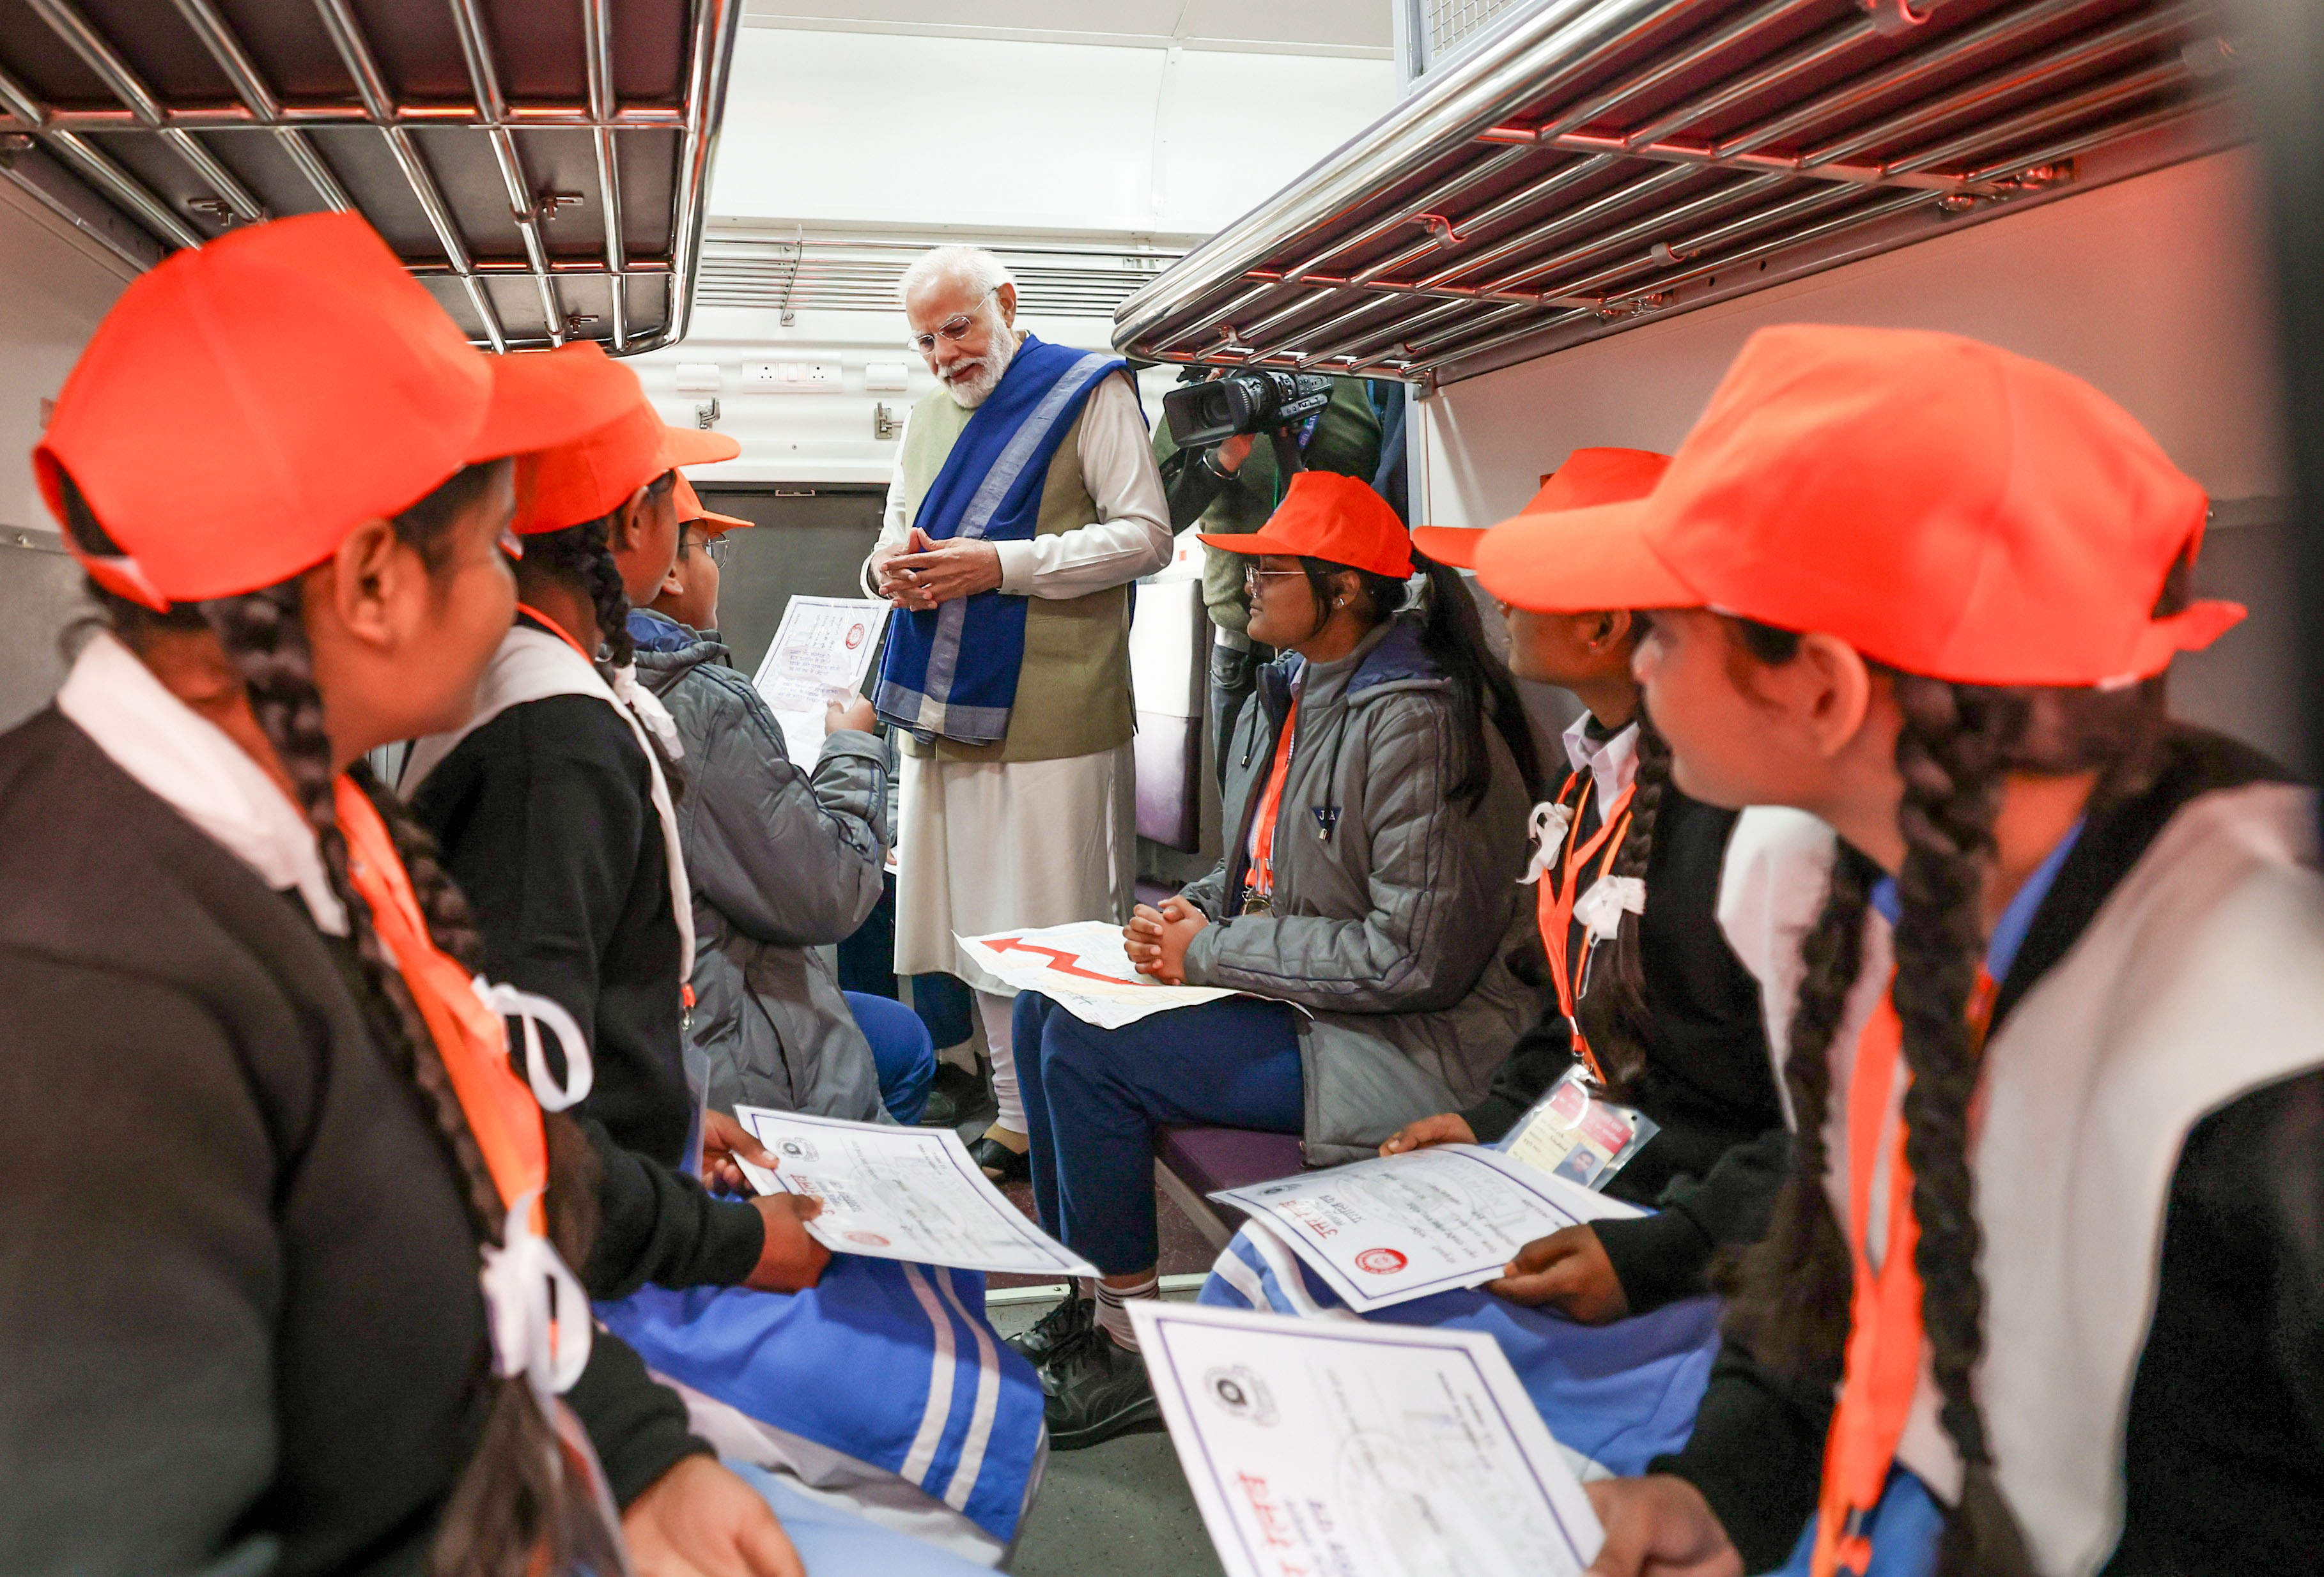 Prime Minister Narendra Modi interacts with students onboard the Amrit Bharat train after inaugurating it, in Ayodhya on Saturday.